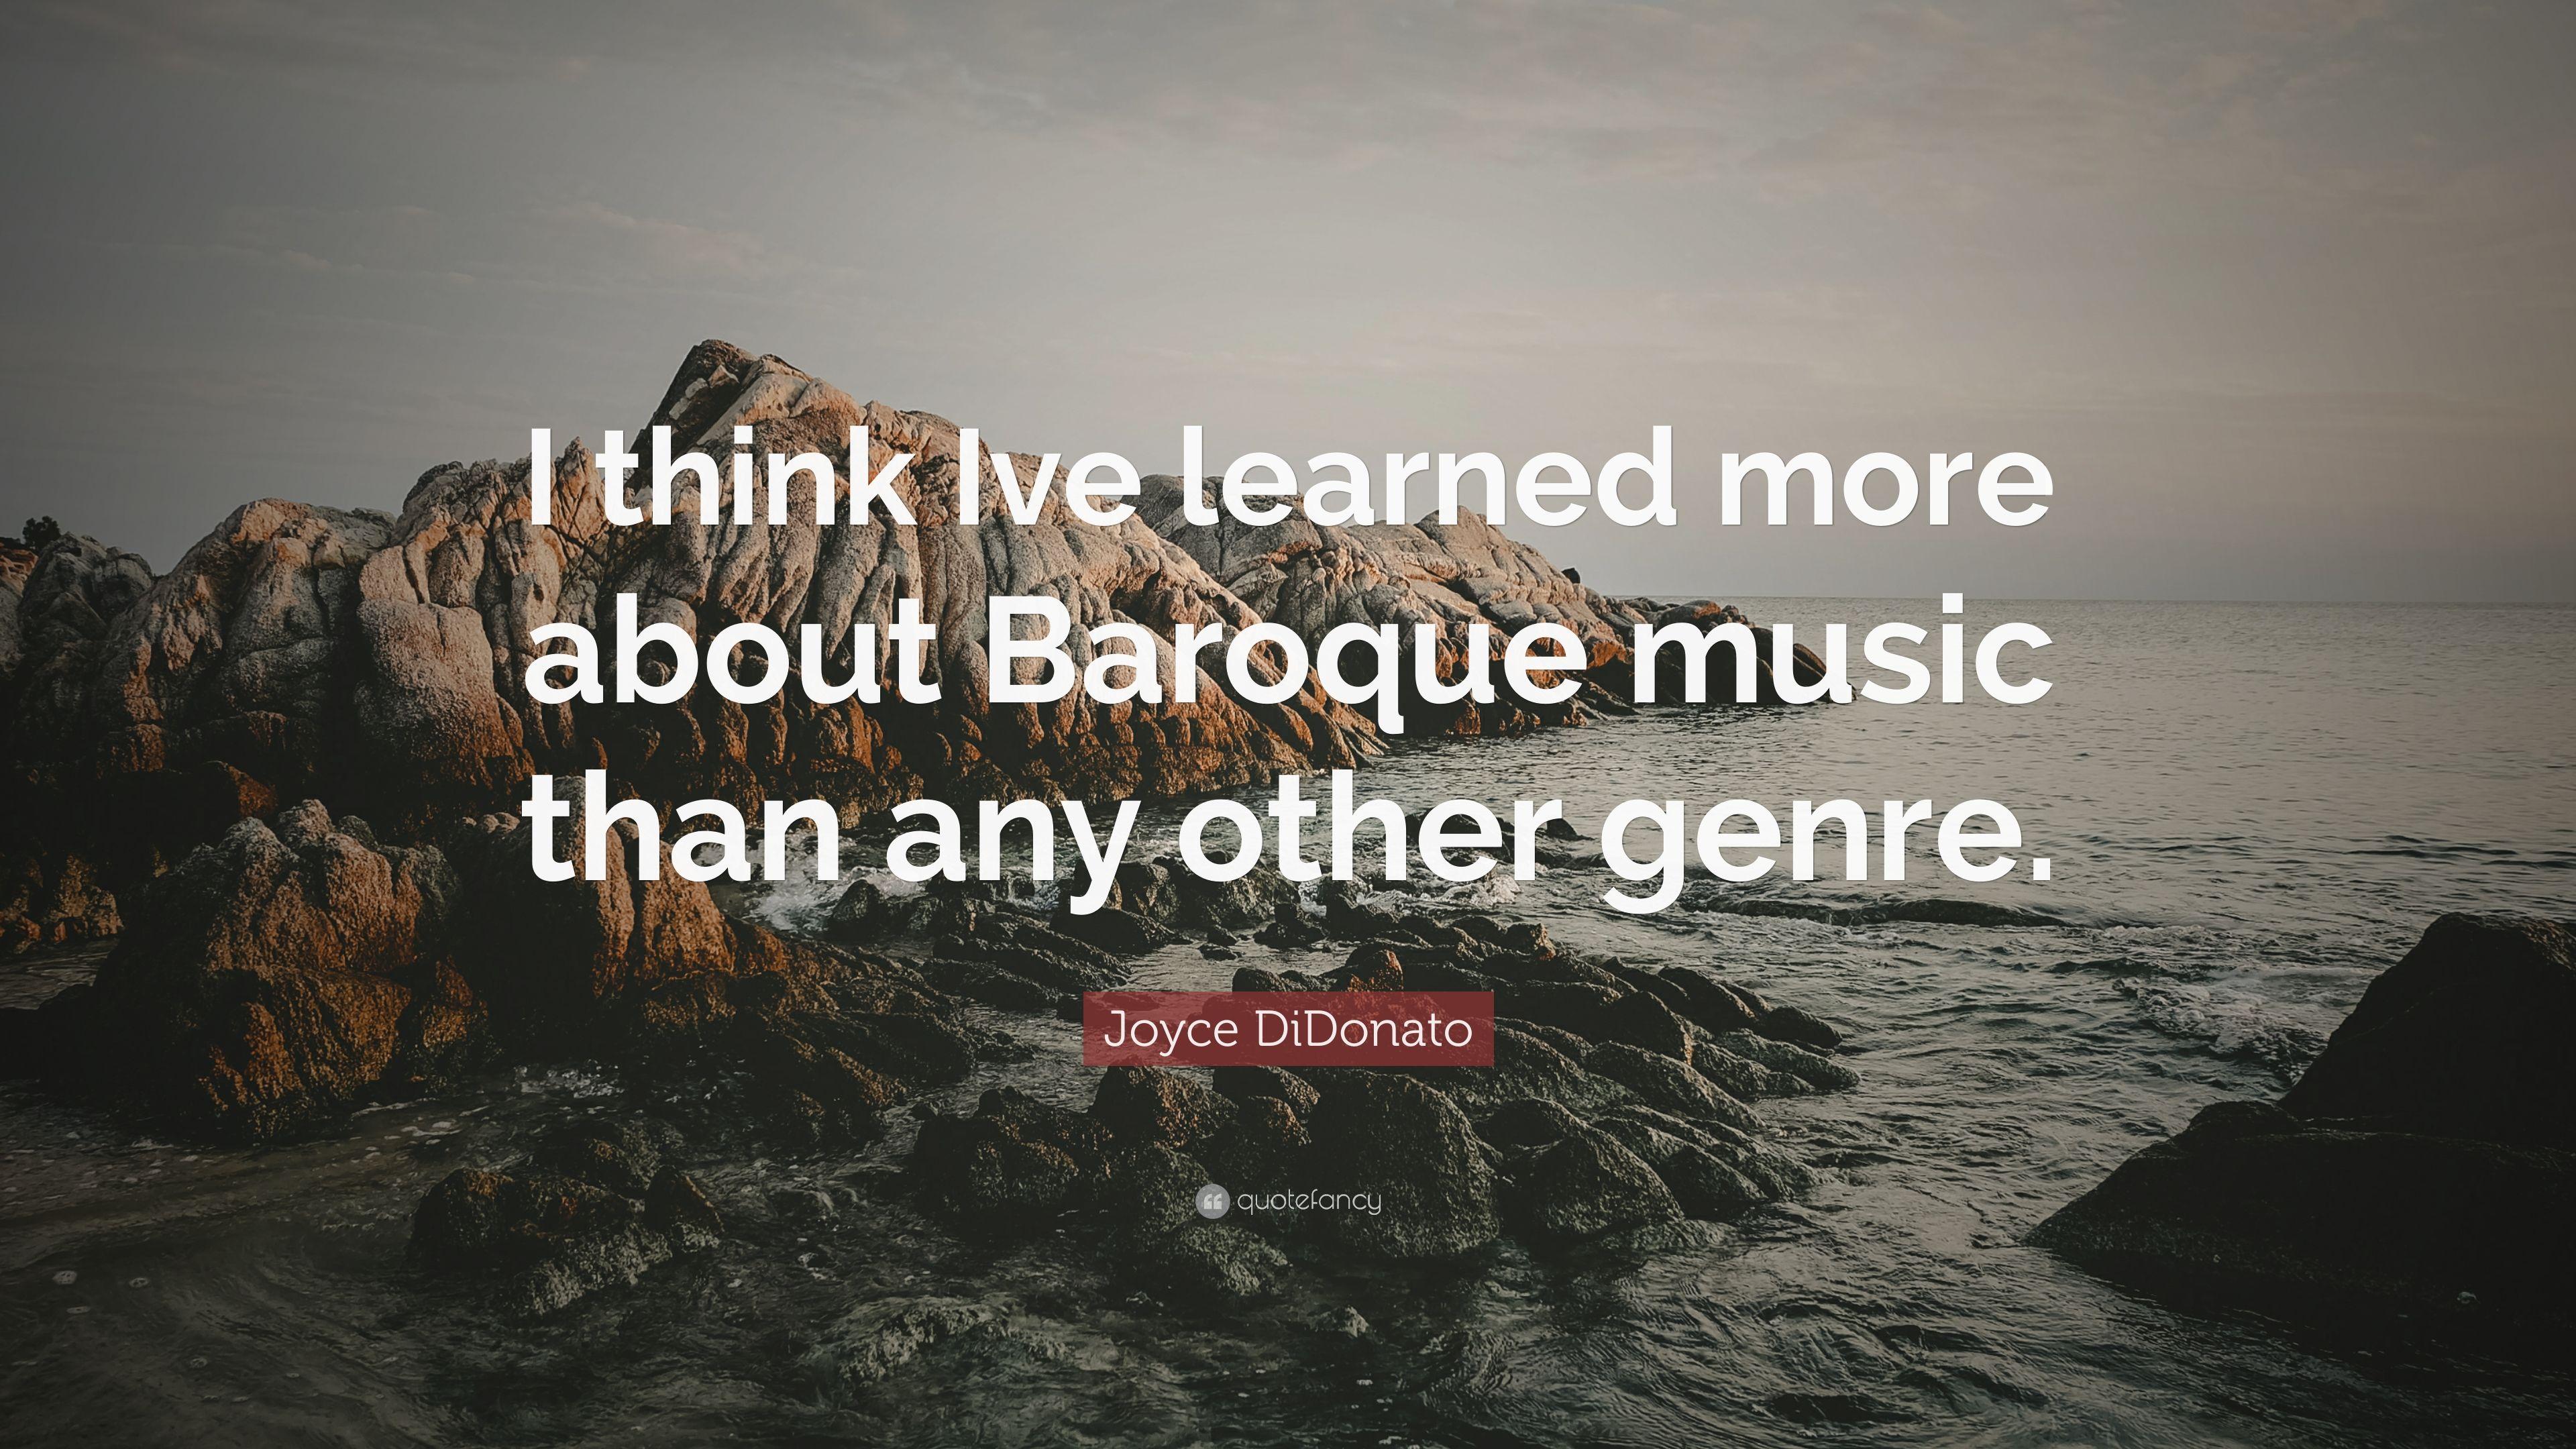 Joyce DiDonato Quote: “I think Ive learned more about Baroque music